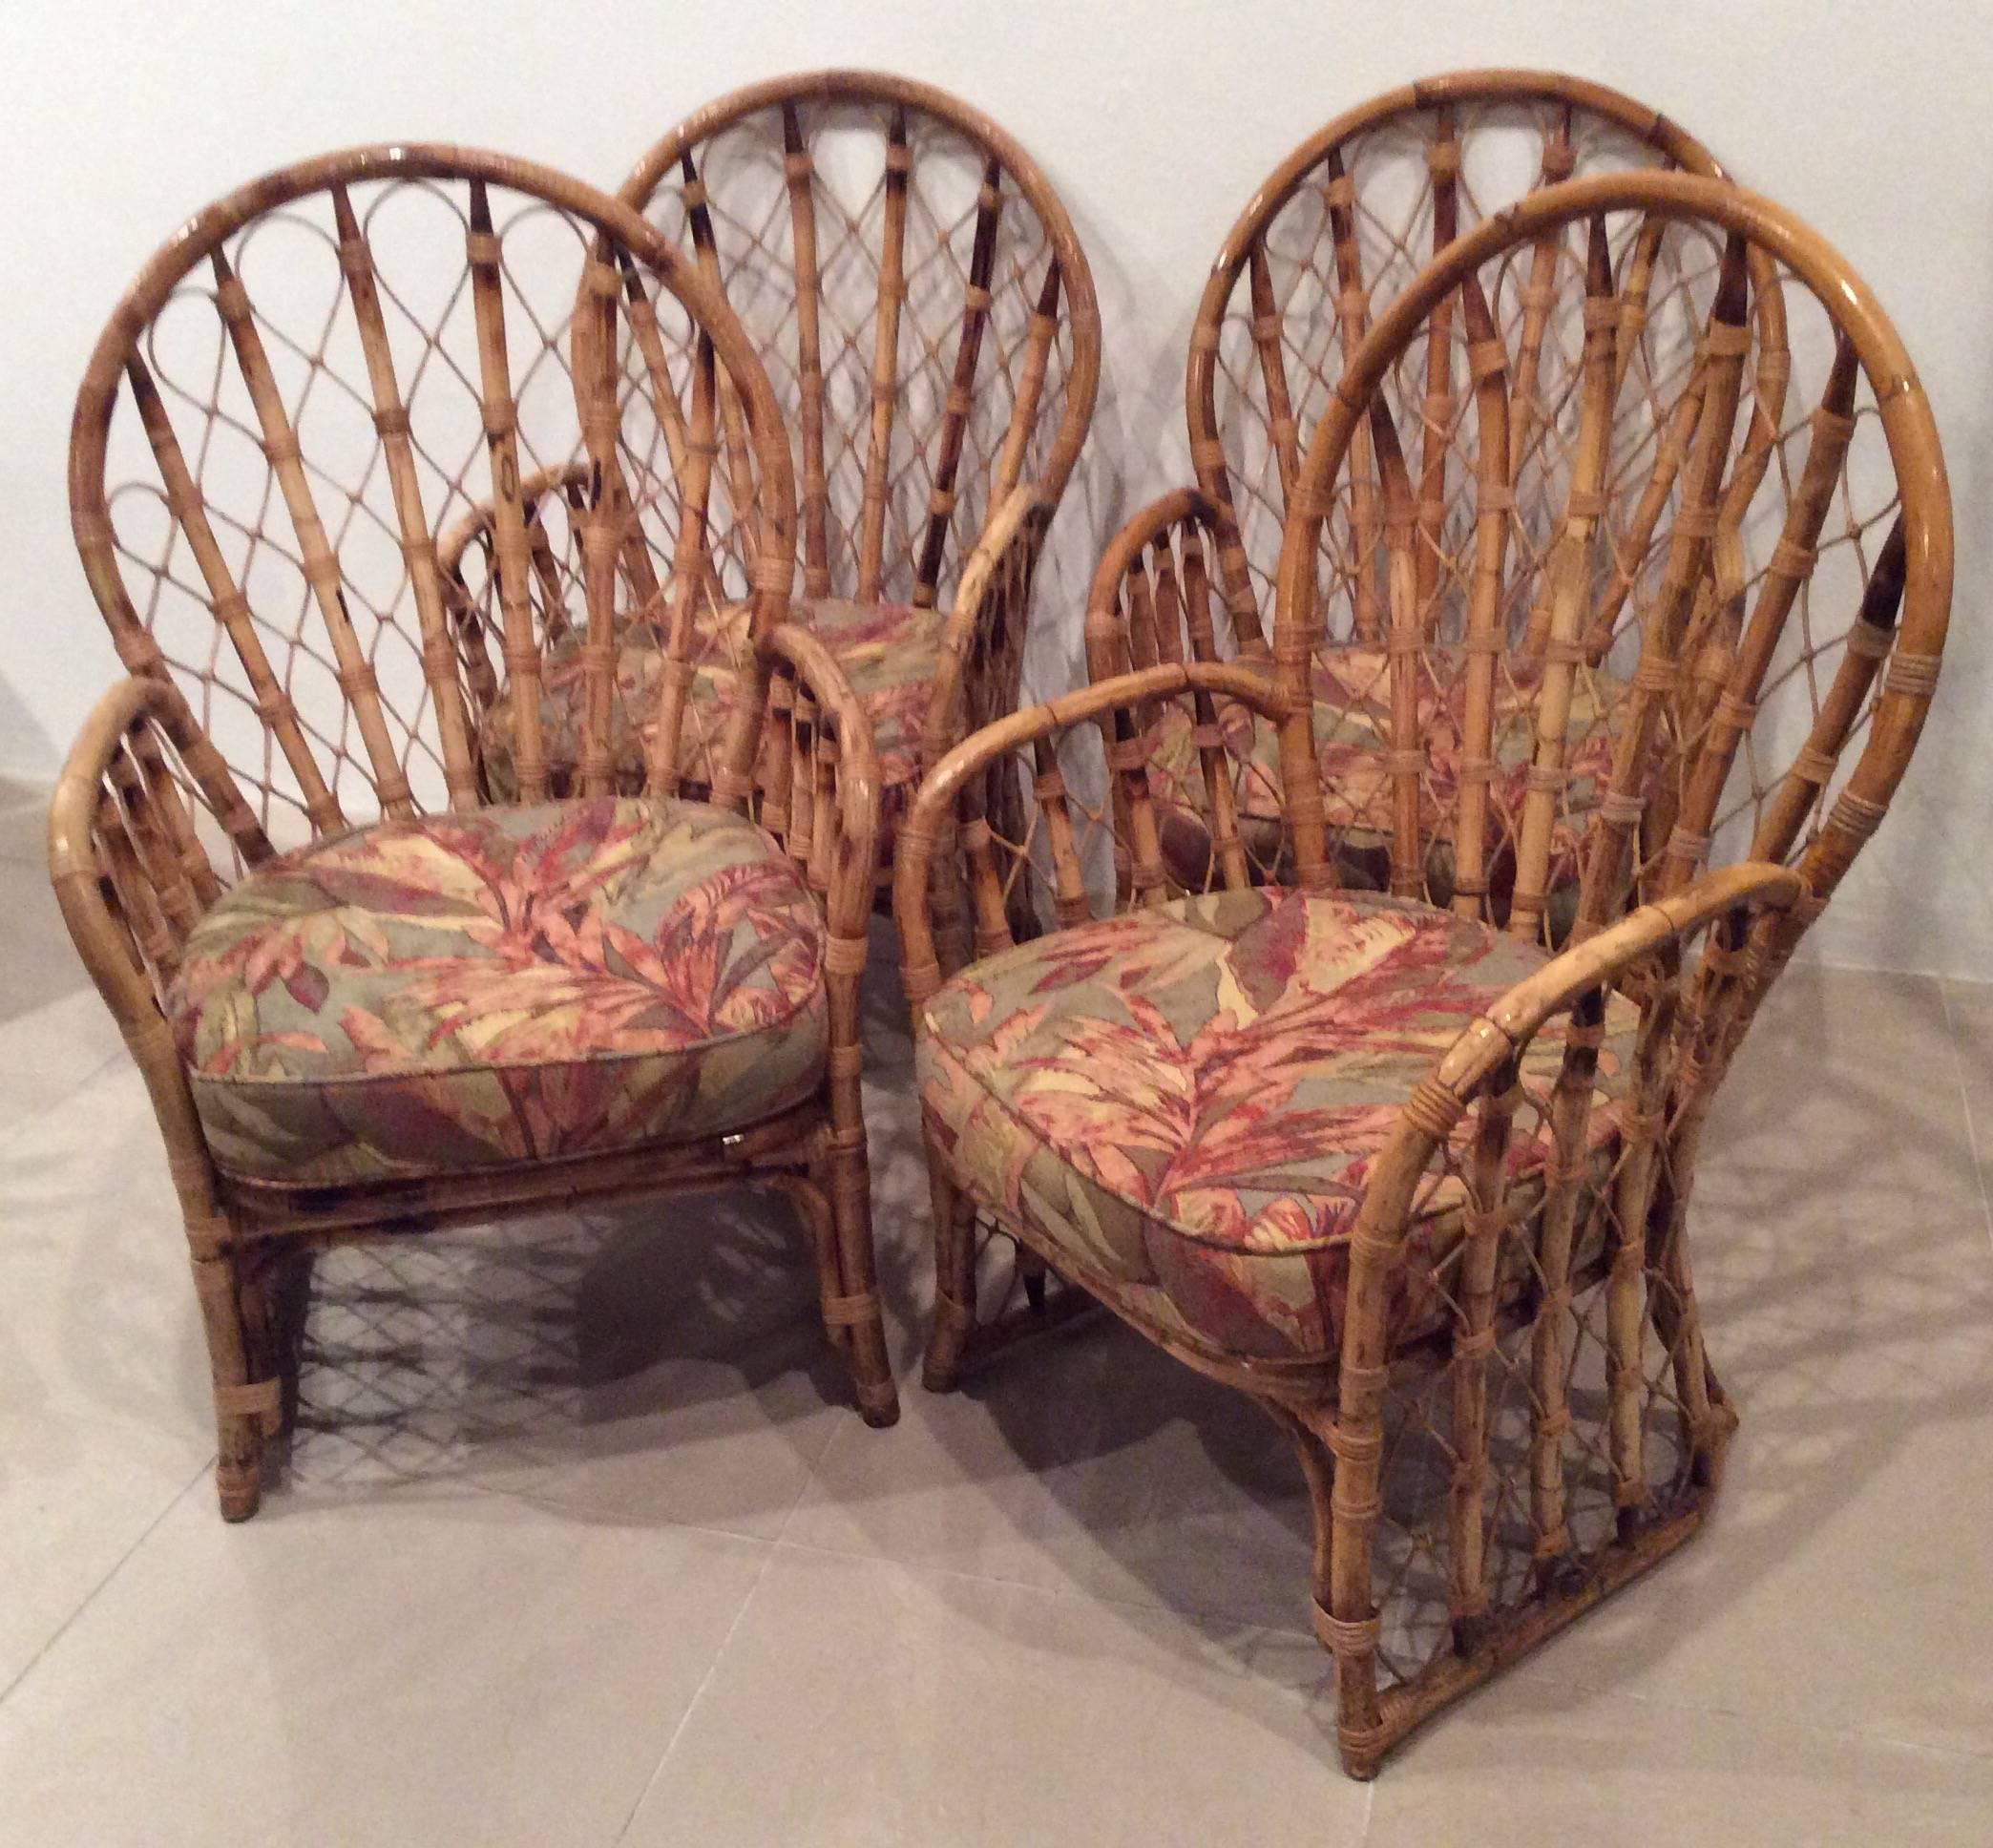 Beautiful set of four faux bamboo high back armchairs. Made in the Philippines. Comes with the cushions. There are a couple pieces of wicker sticks missing. Overall condition is good. Chinese Chippendale Chinoiserie pattern. 
